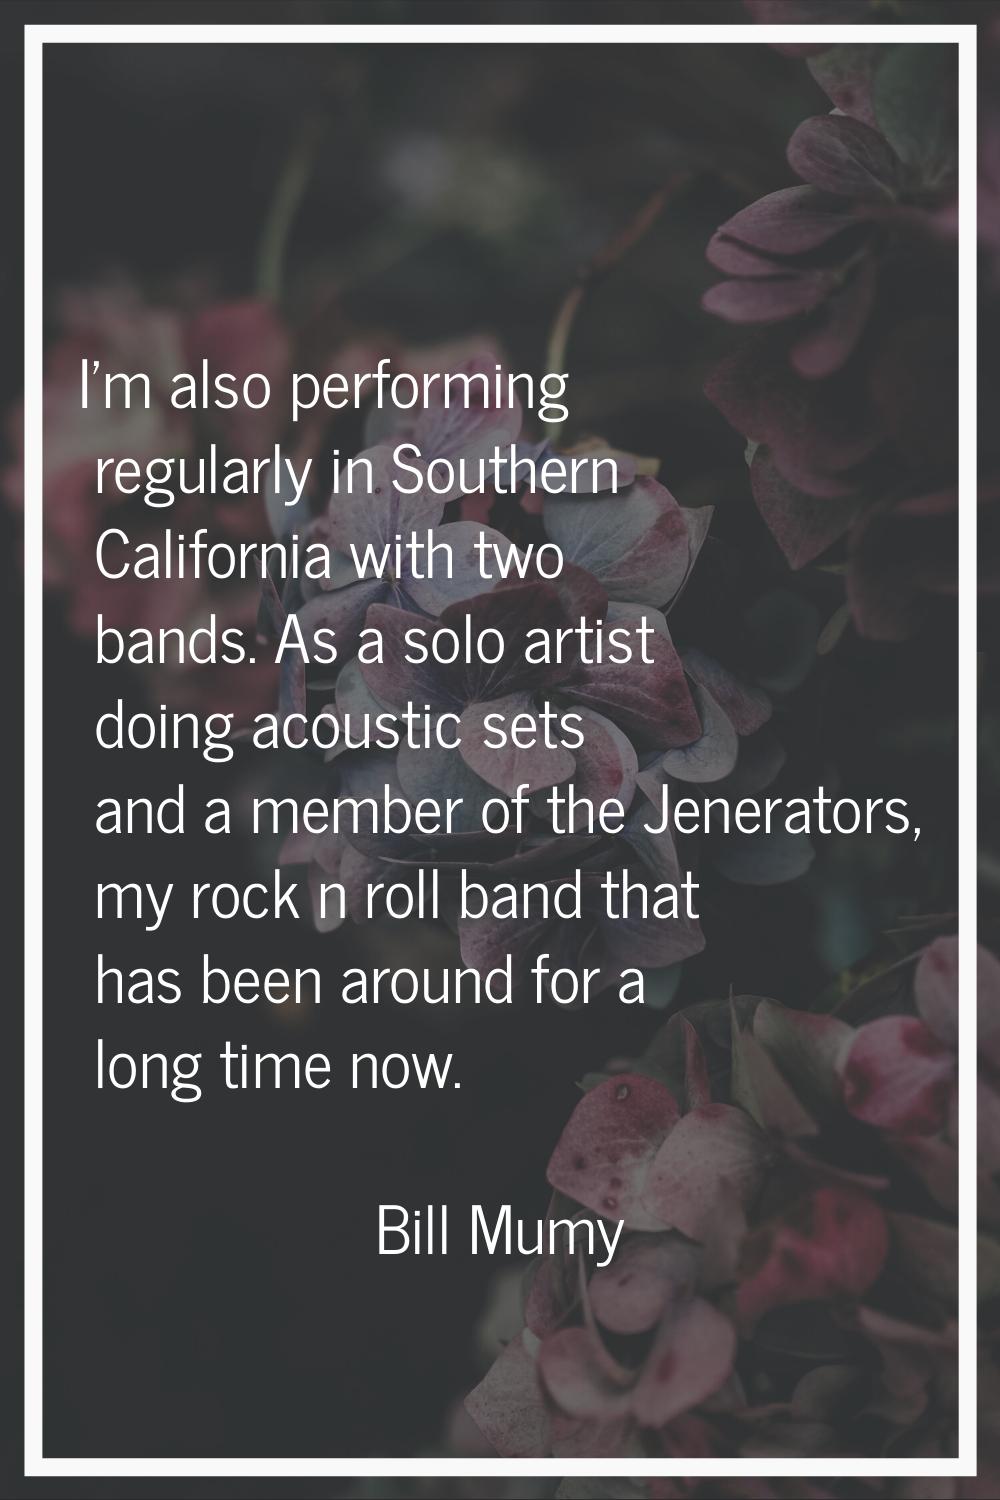 I'm also performing regularly in Southern California with two bands. As a solo artist doing acousti